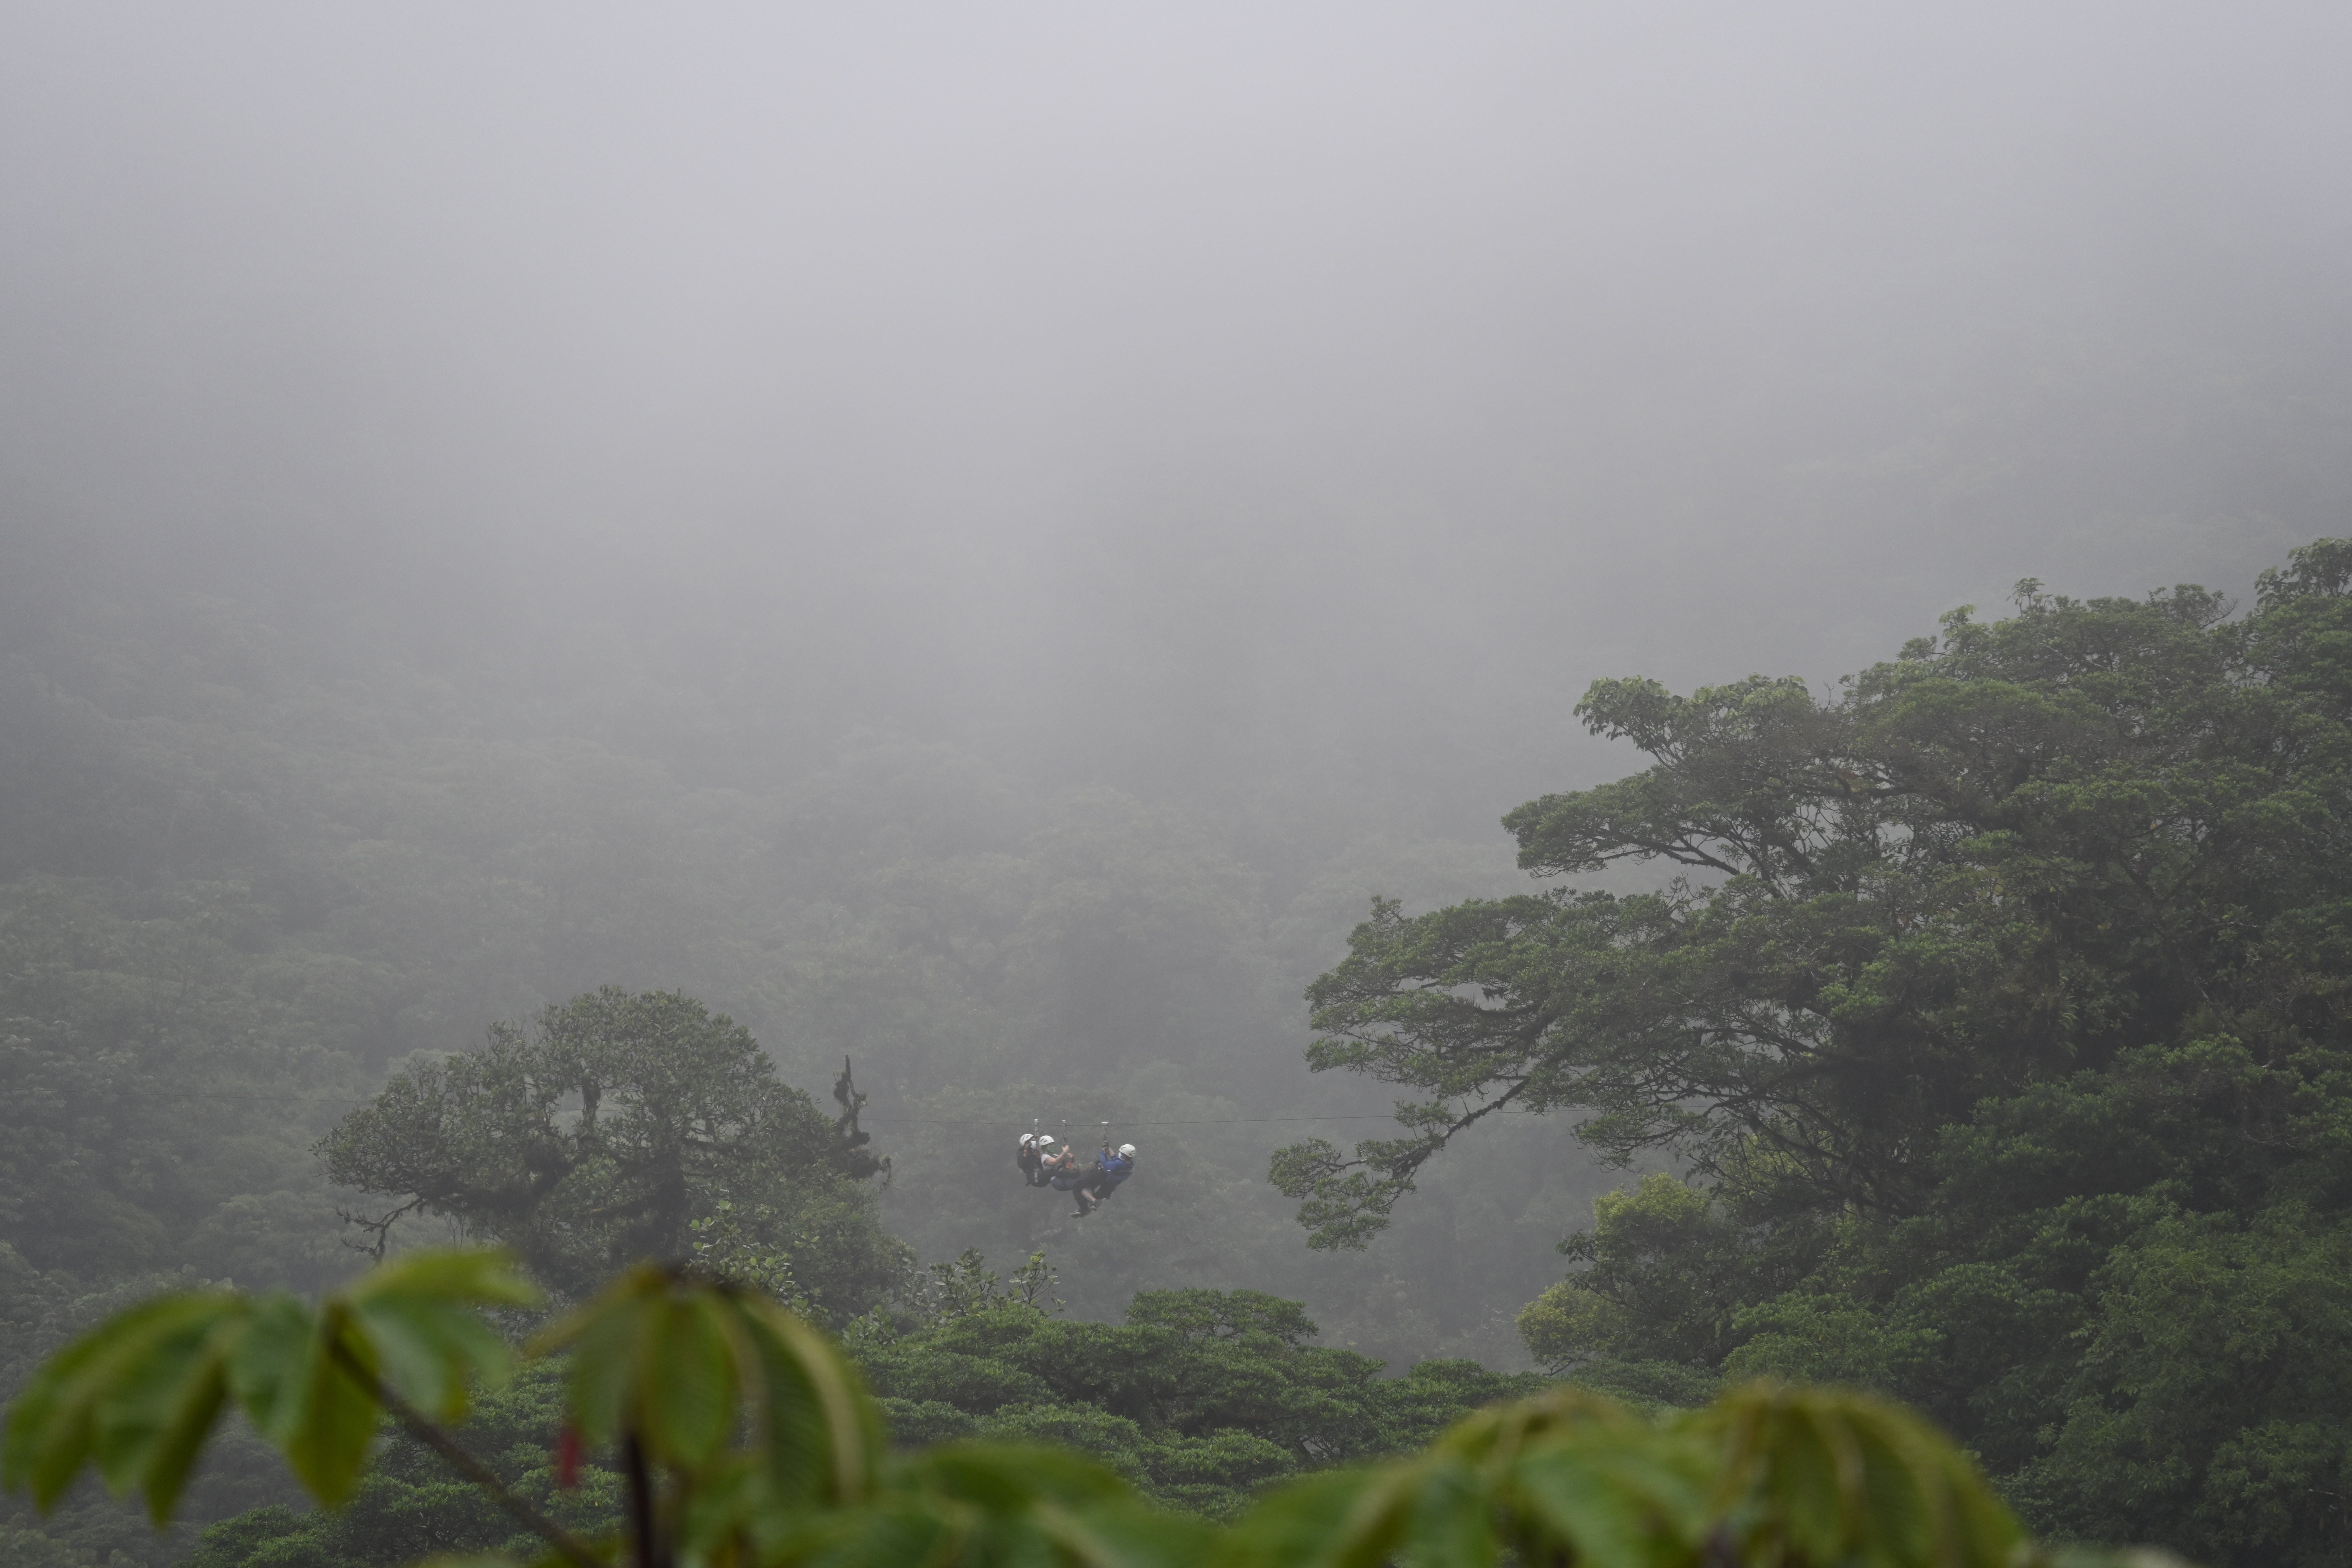 Two adventurers zip-lining over the lush green canopy of Monteverde Cloud Forest Reserve, enveloped by dense mist.